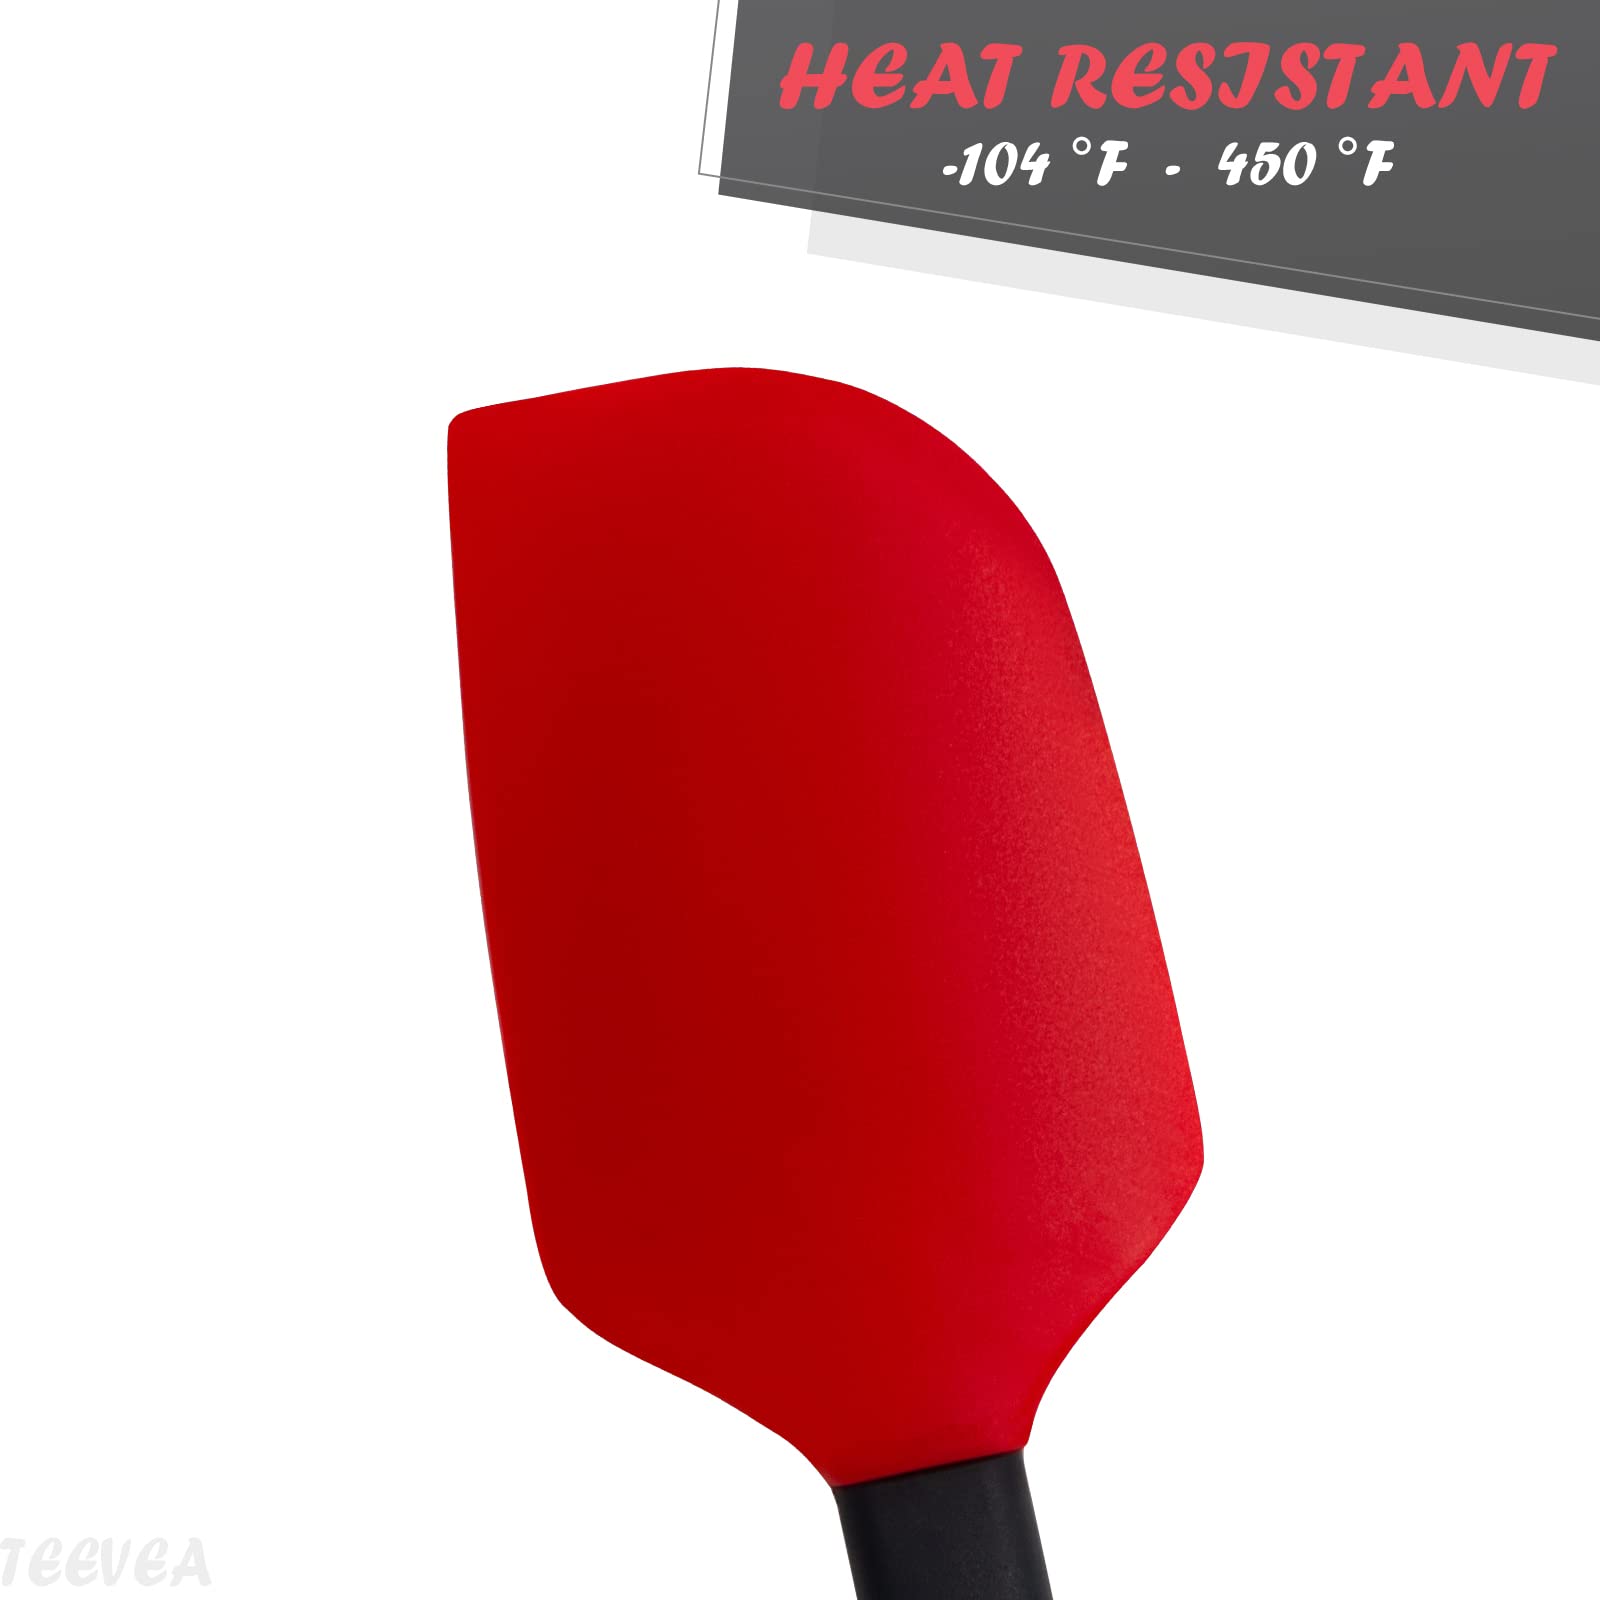 TEEVEA Silicone Spatula,Spatulas Silicone Heat Resistant,Large Non Stick Cookware Silicone Rubber Spatula for Kitchen Cooking,Baking and Mixing Set of 4,Red Black